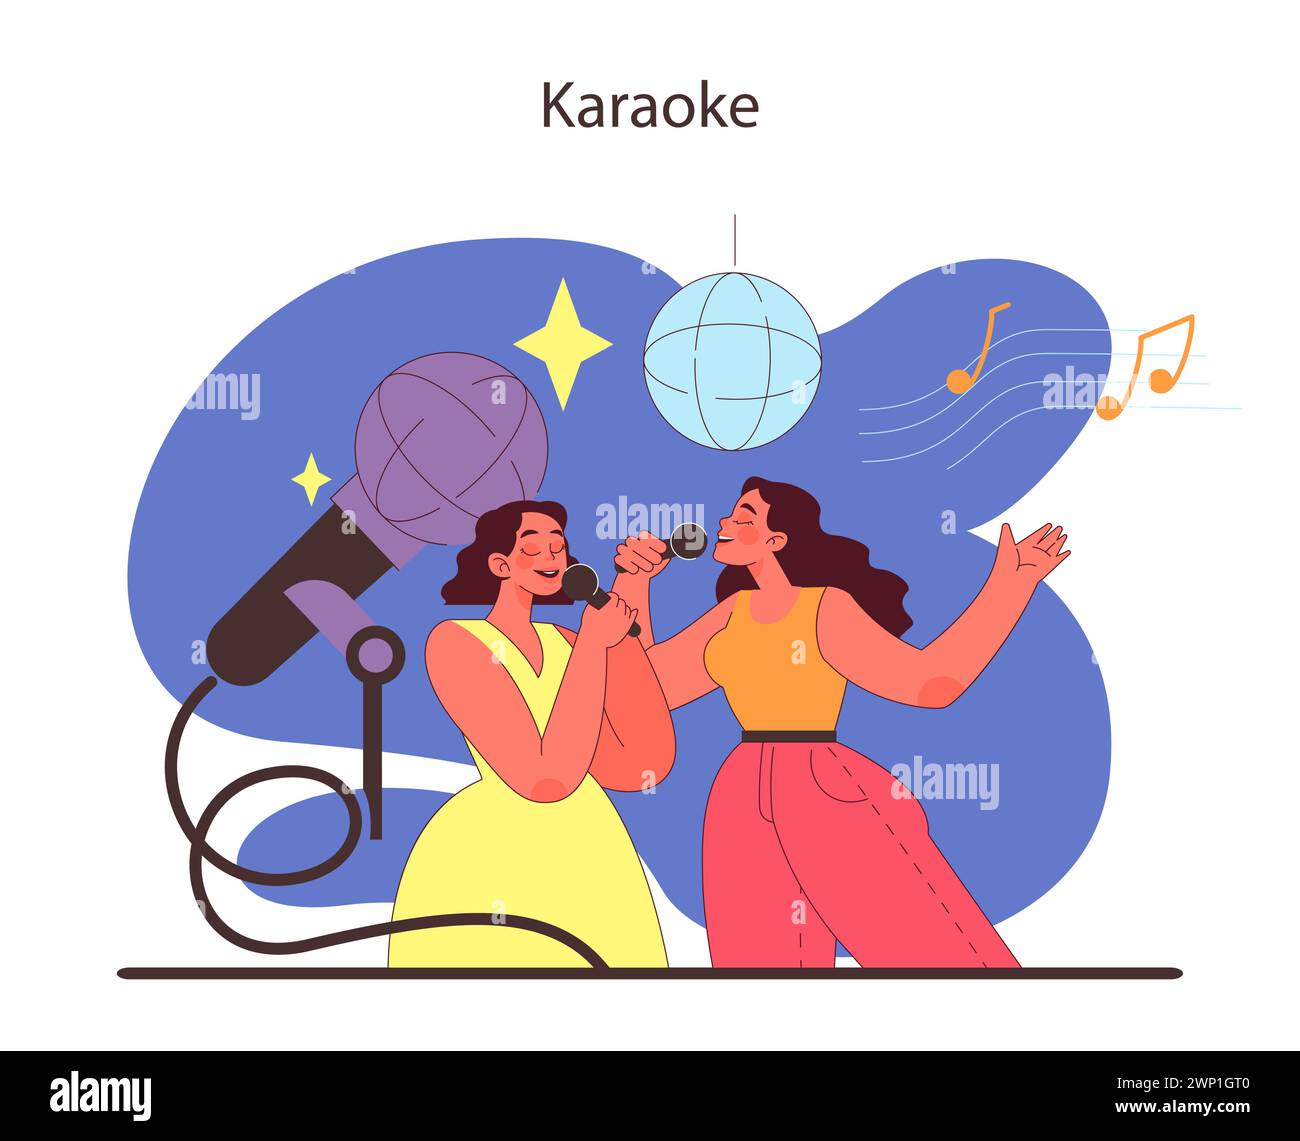 Karaoke concept. Duo joyfully singing with a microphone, basking in the glow of a disco ball. Musical expression and entertainment at a fun-filled karaoke night. Flat vector illustration. Stock Vector